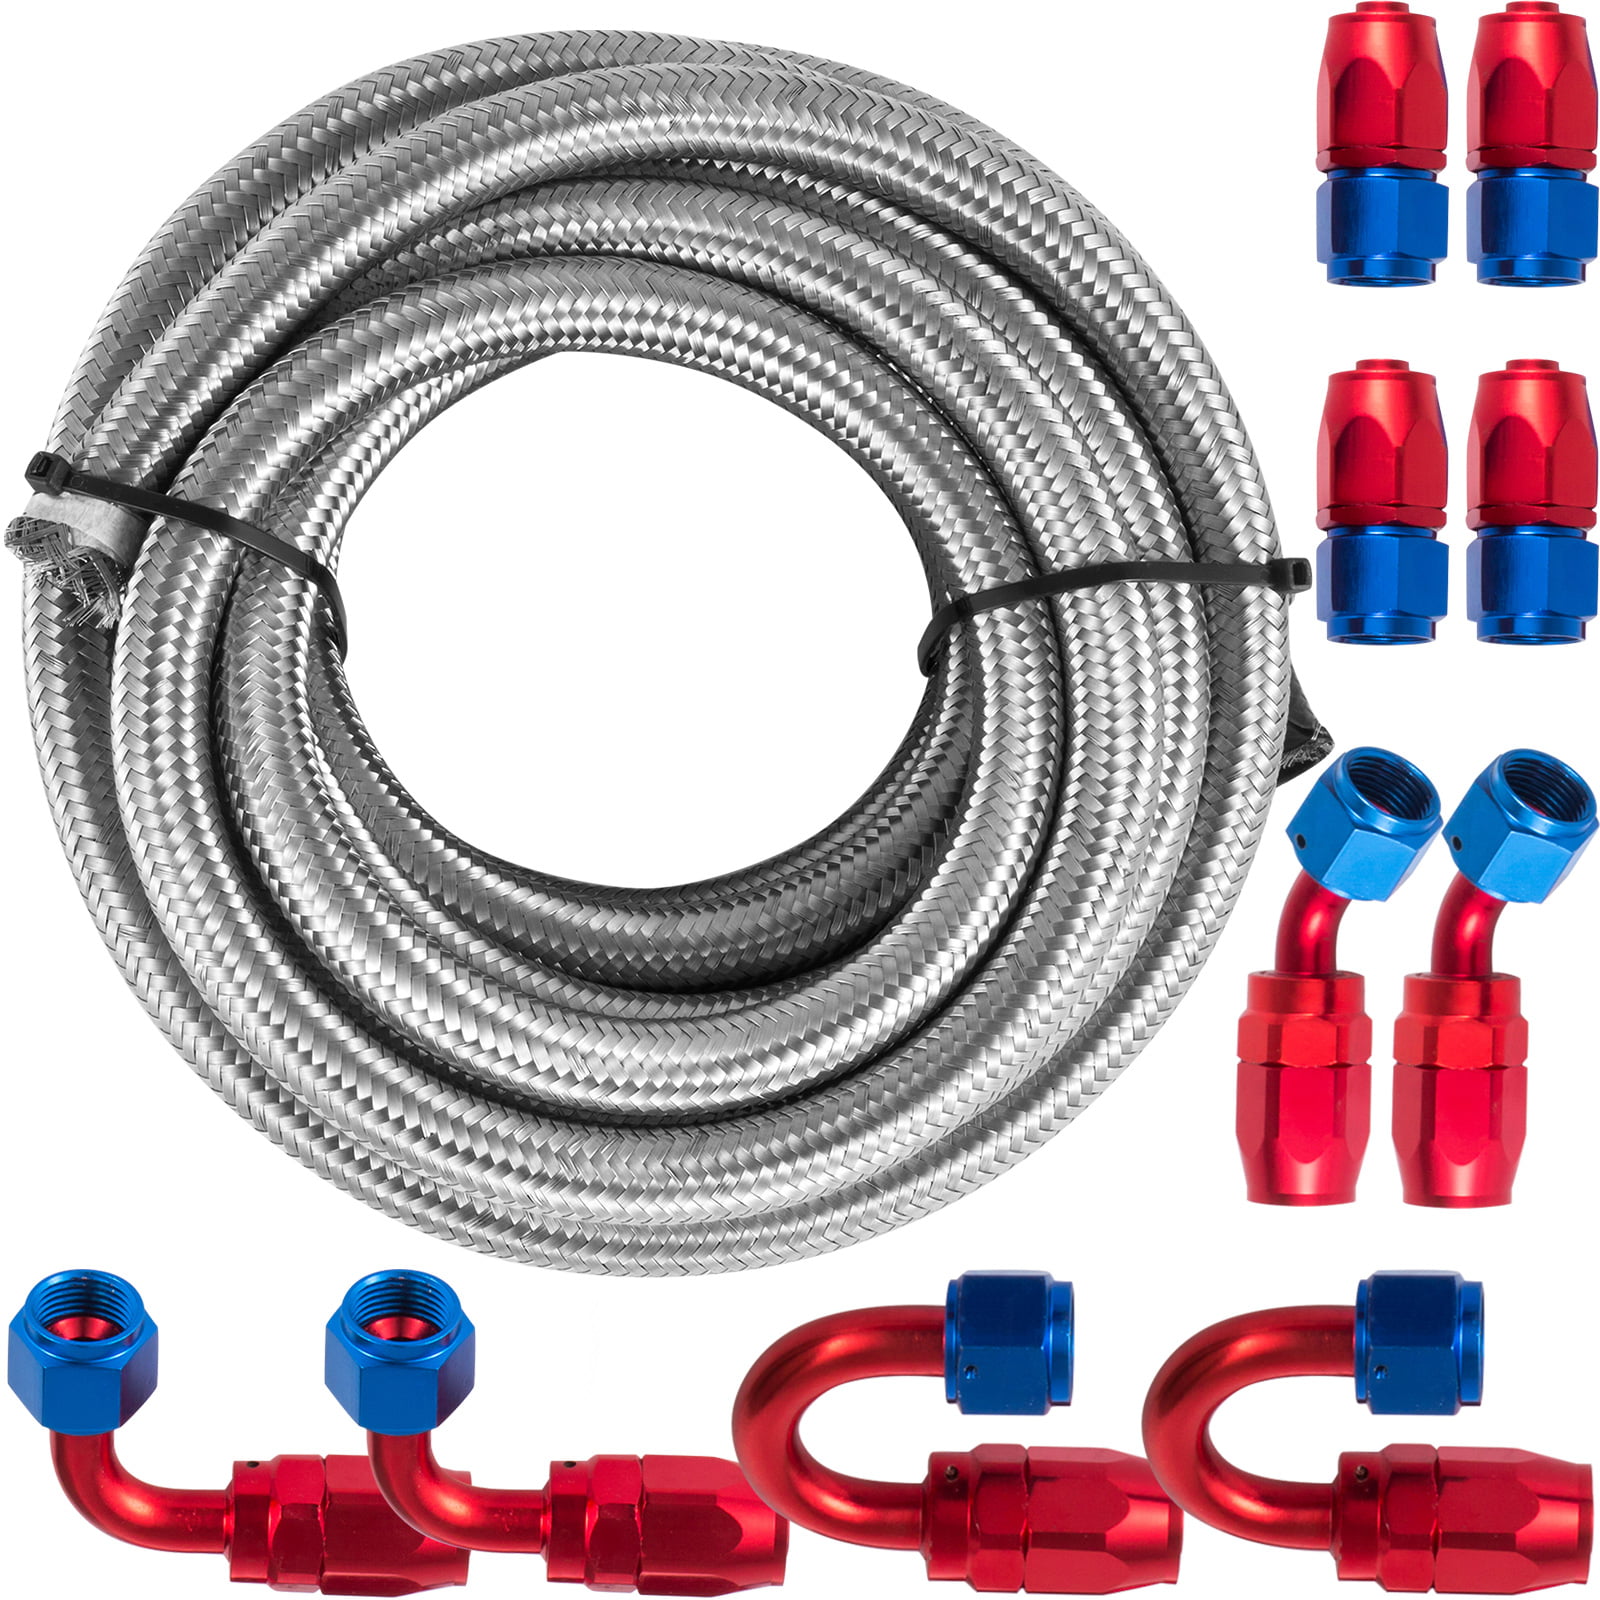 Details about   AN6 Stainless Steel Braided Fuel Line E85 Fitting Hose End Adaptor Kit 20FT 